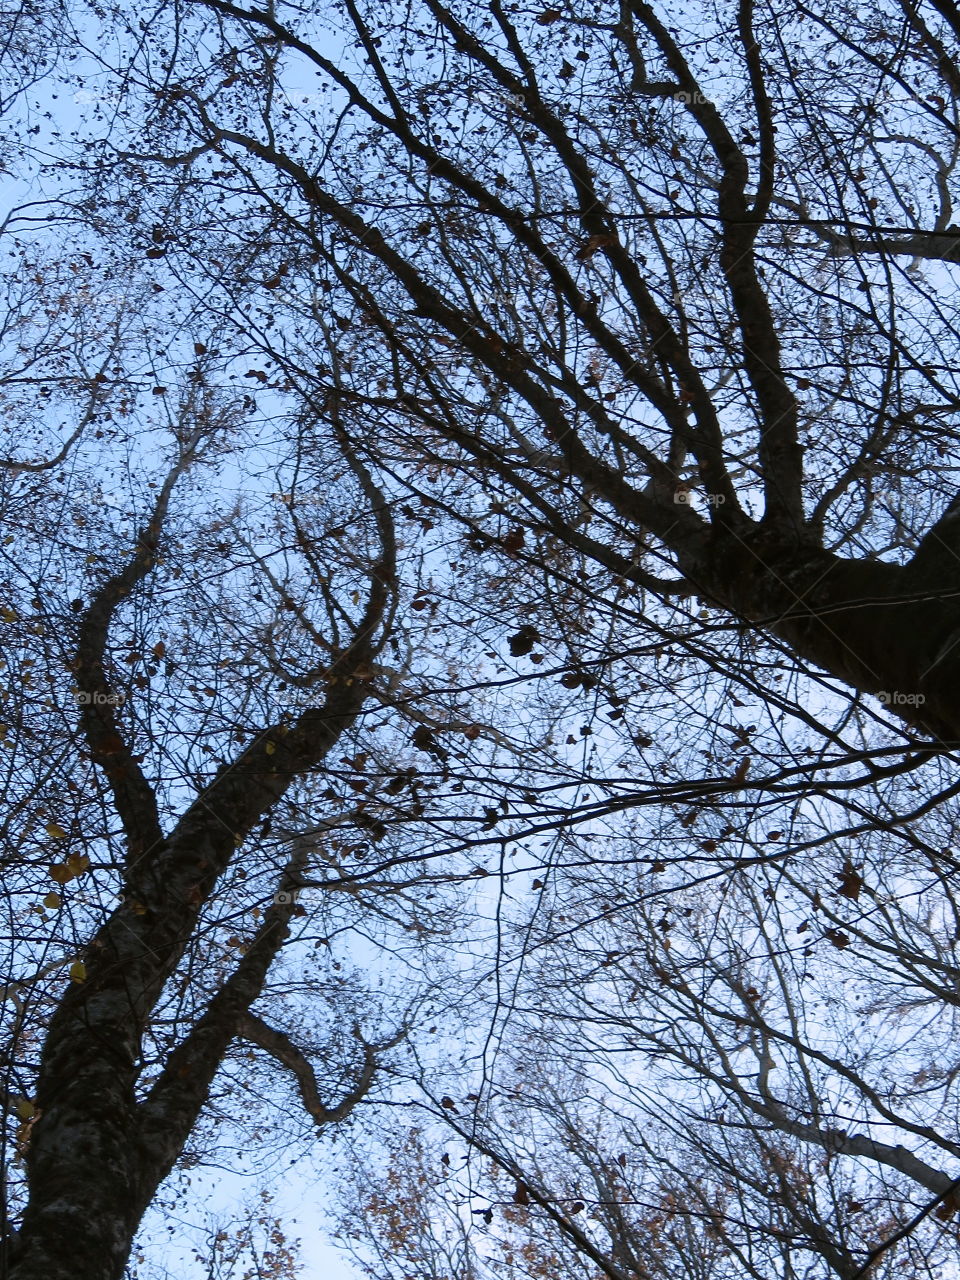 view through the treetops from the bottom To the top